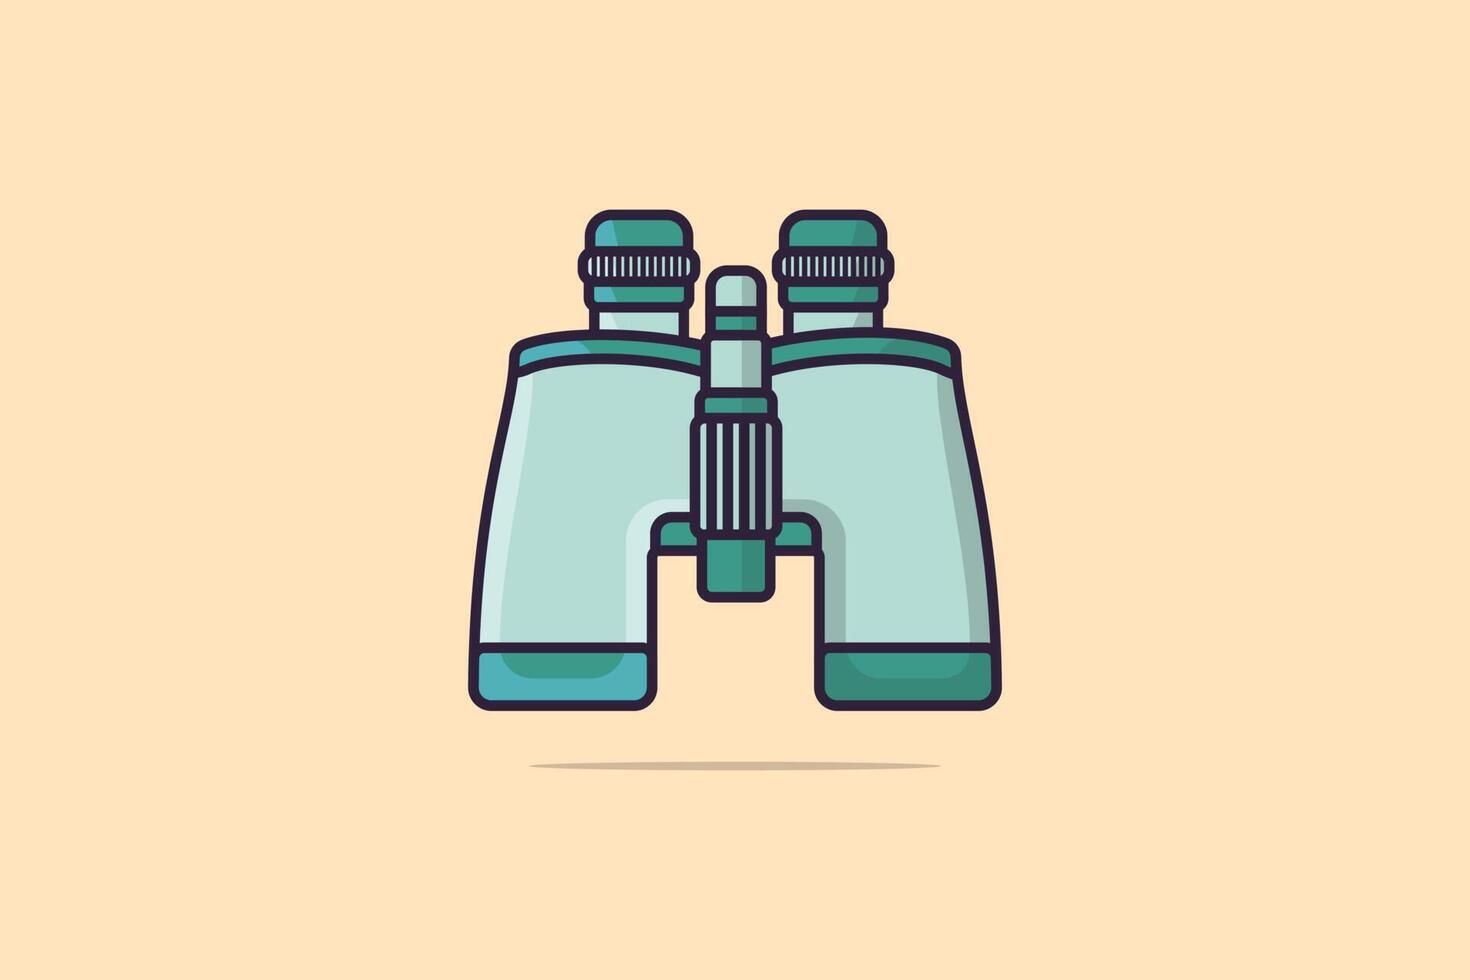 Binoculars Optical Instrument vector illustration. Binocular explorer object icon concept. Binoculars with glass lenses for viewing distant object vector design with shadow on light orange background.